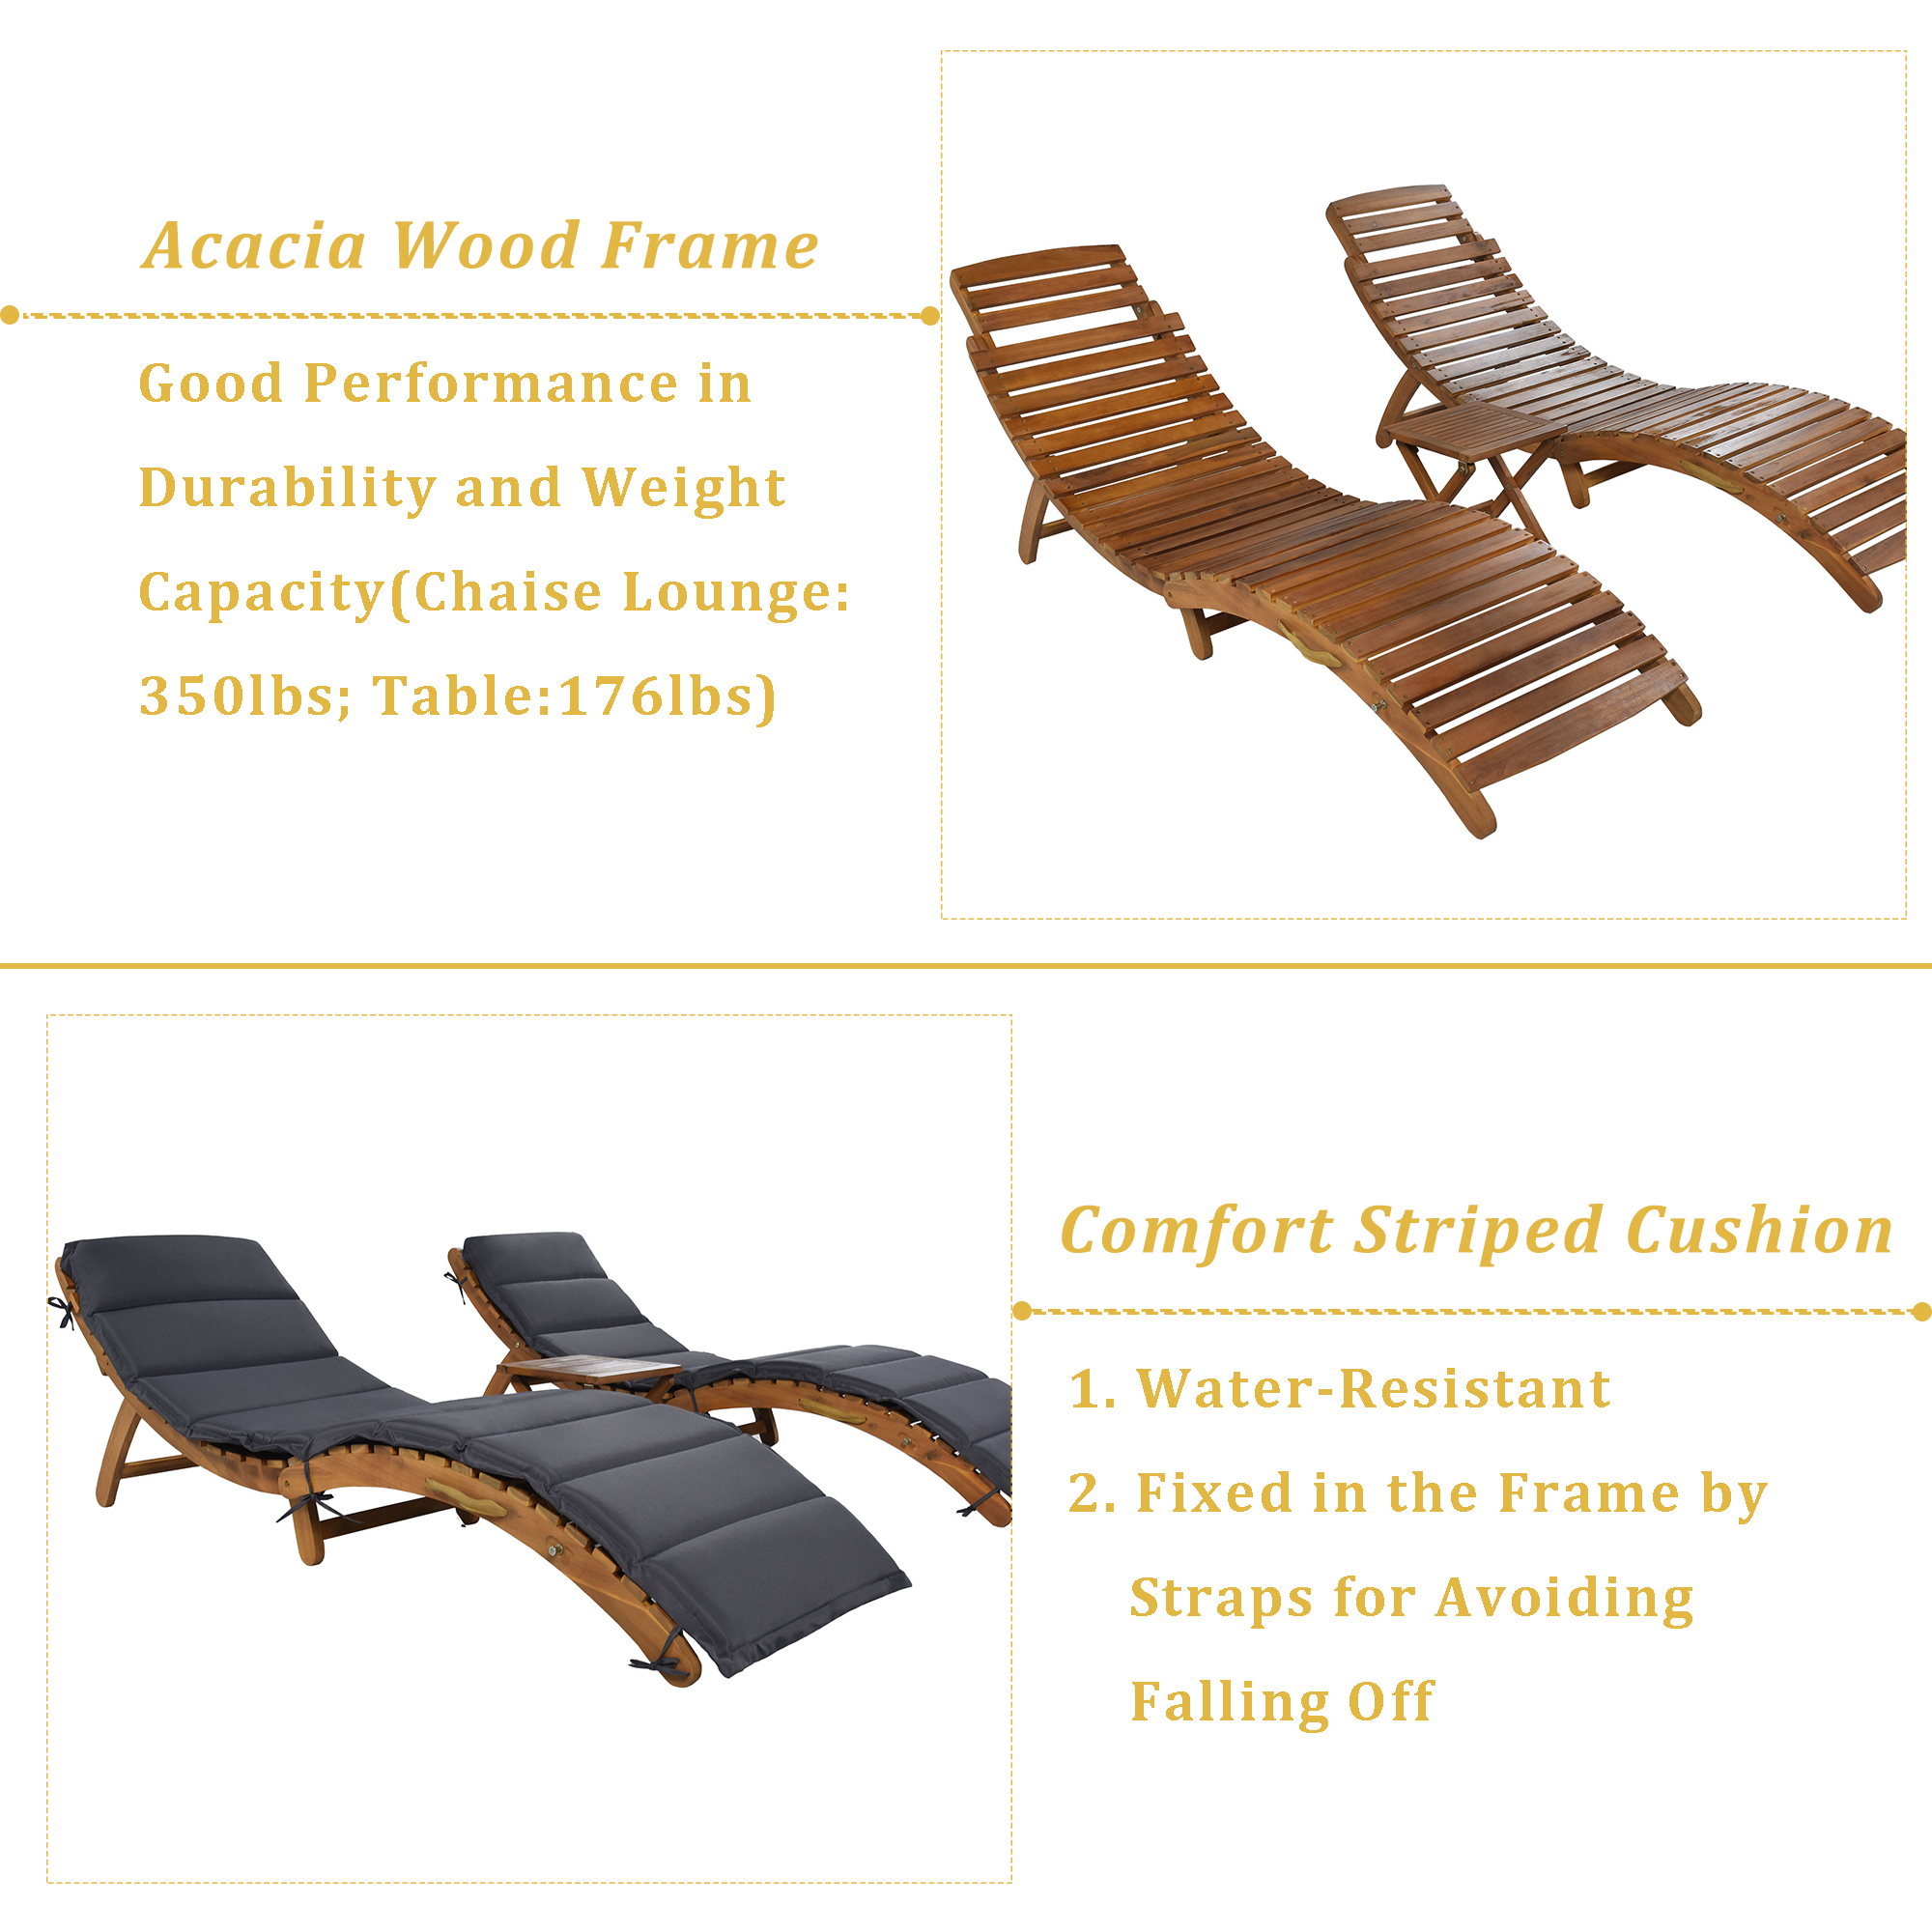 Royard Oaktree Patio Lounge Chair Set of 3 Wood Folding Chaise Lounge Set with Foldable Side Table Outdoor Portable Extended Sun Lounge Chair with Cushion for Poolside Lawn Backyard,Dark Gray - image 2 of 7